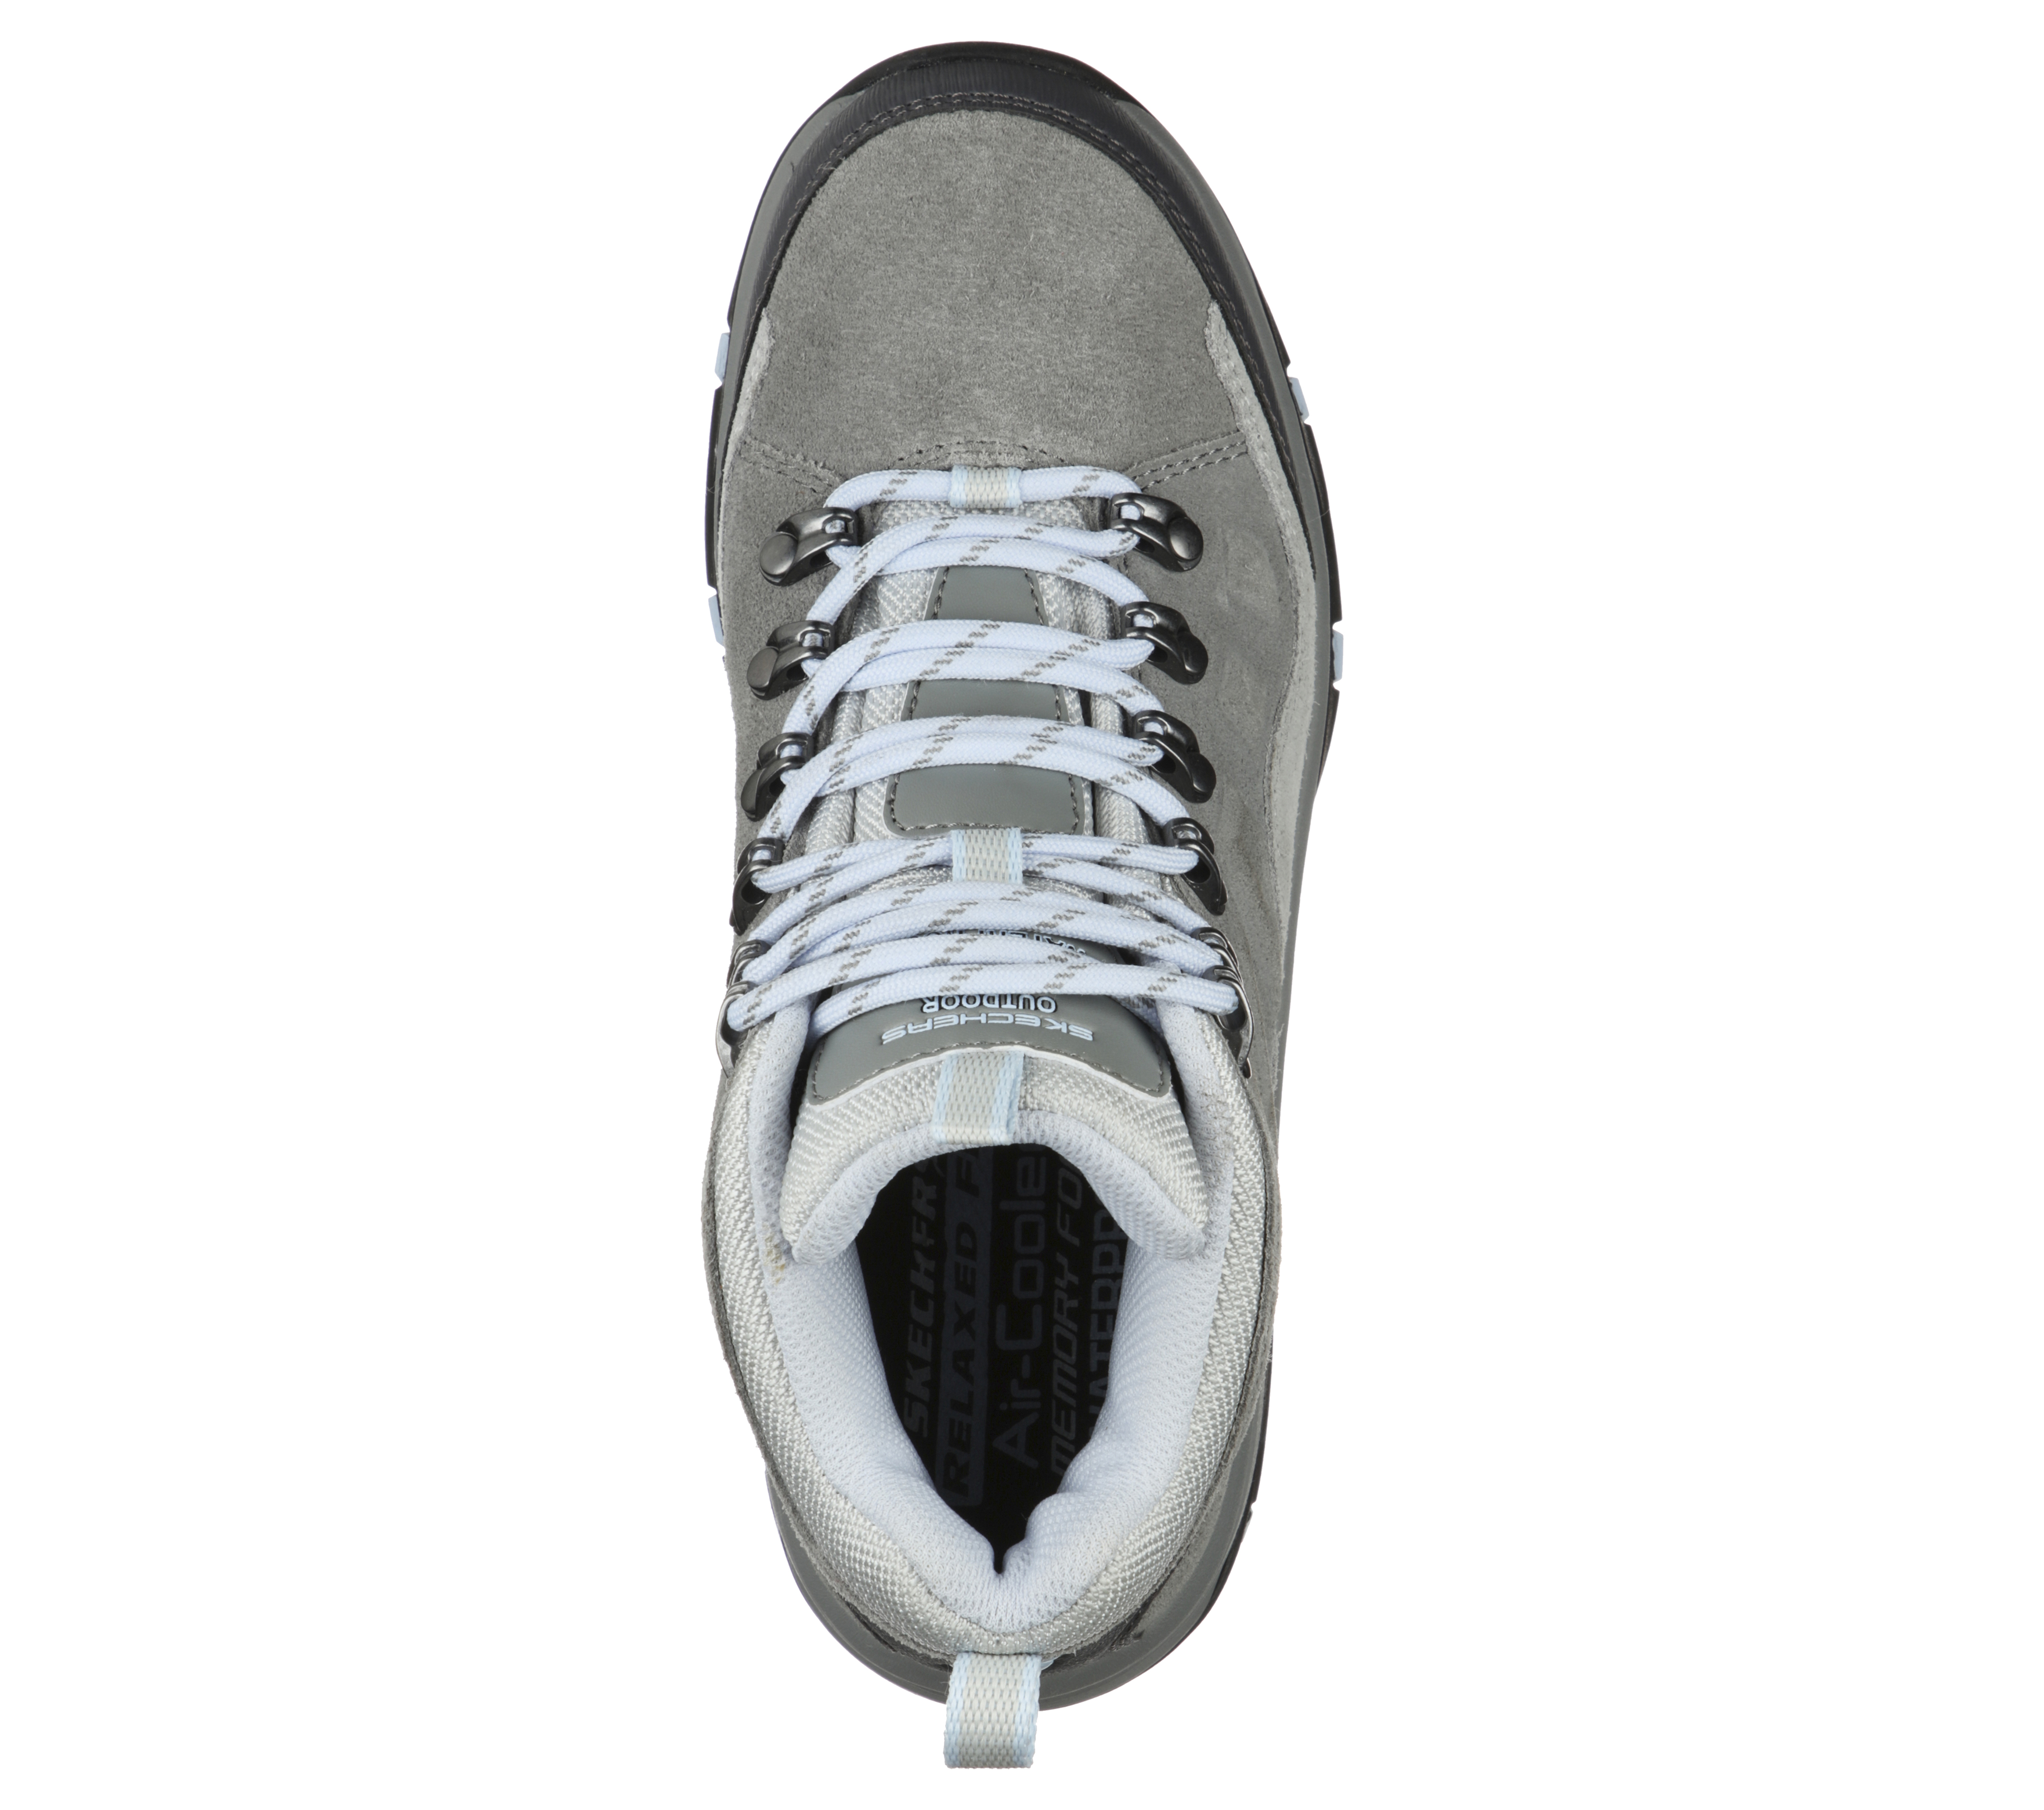 Skechers Golf Shoes Leaking | lupon.gov.ph